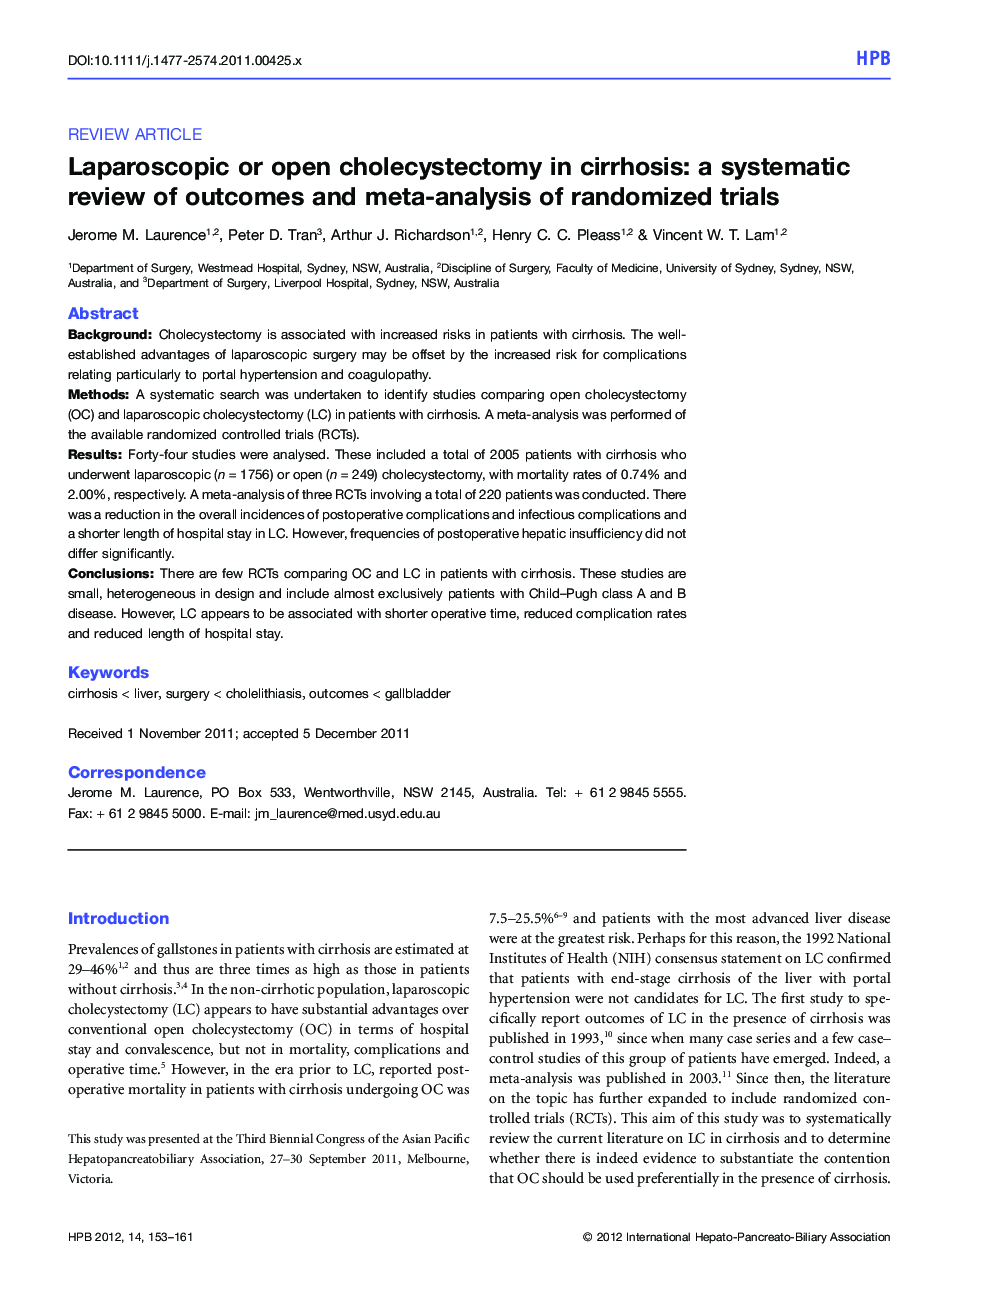 Laparoscopic or open cholecystectomy in cirrhosis: a systematic review of outcomes and meta-analysis of randomized trials